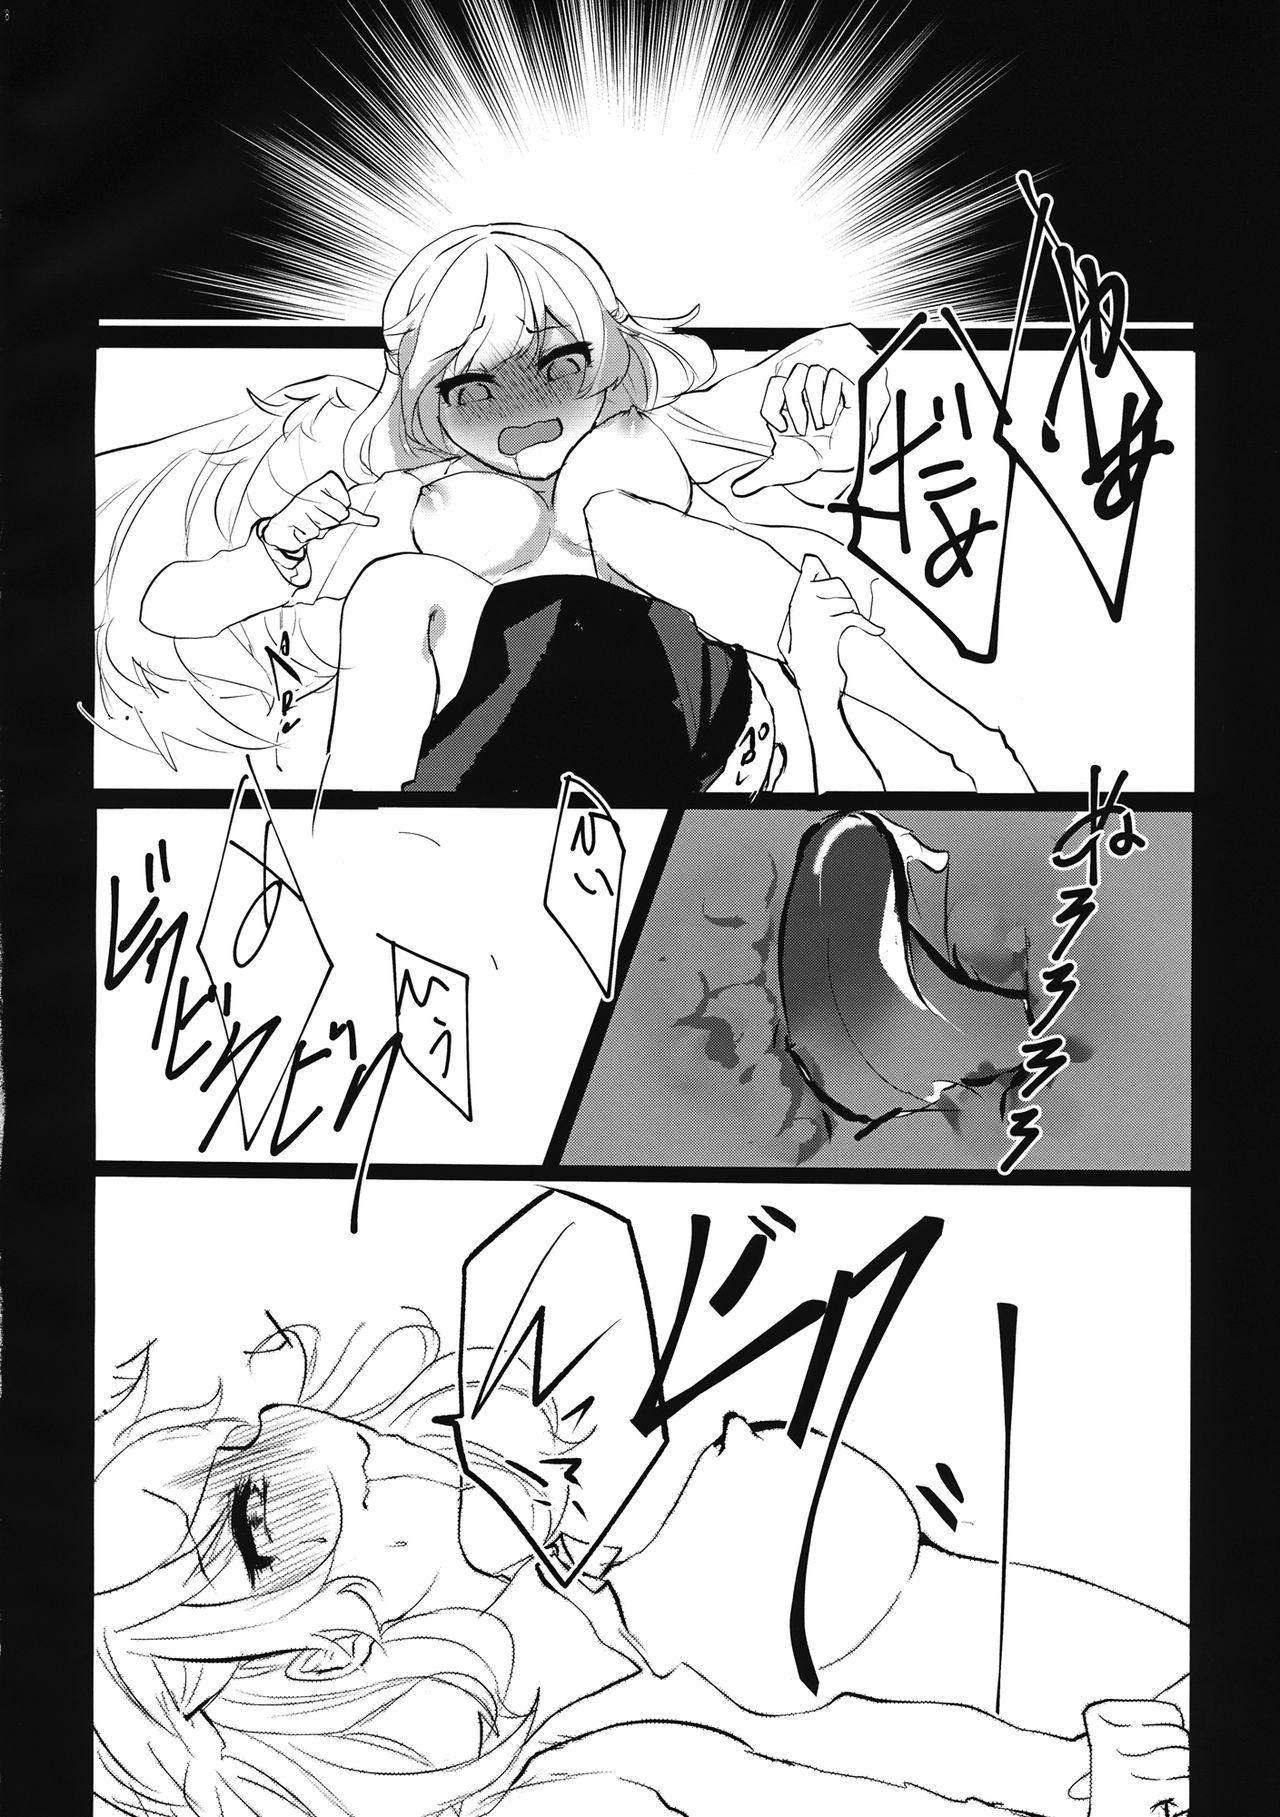 Boobies deep in my heart in dream - Touhou project Naturaltits - Page 9